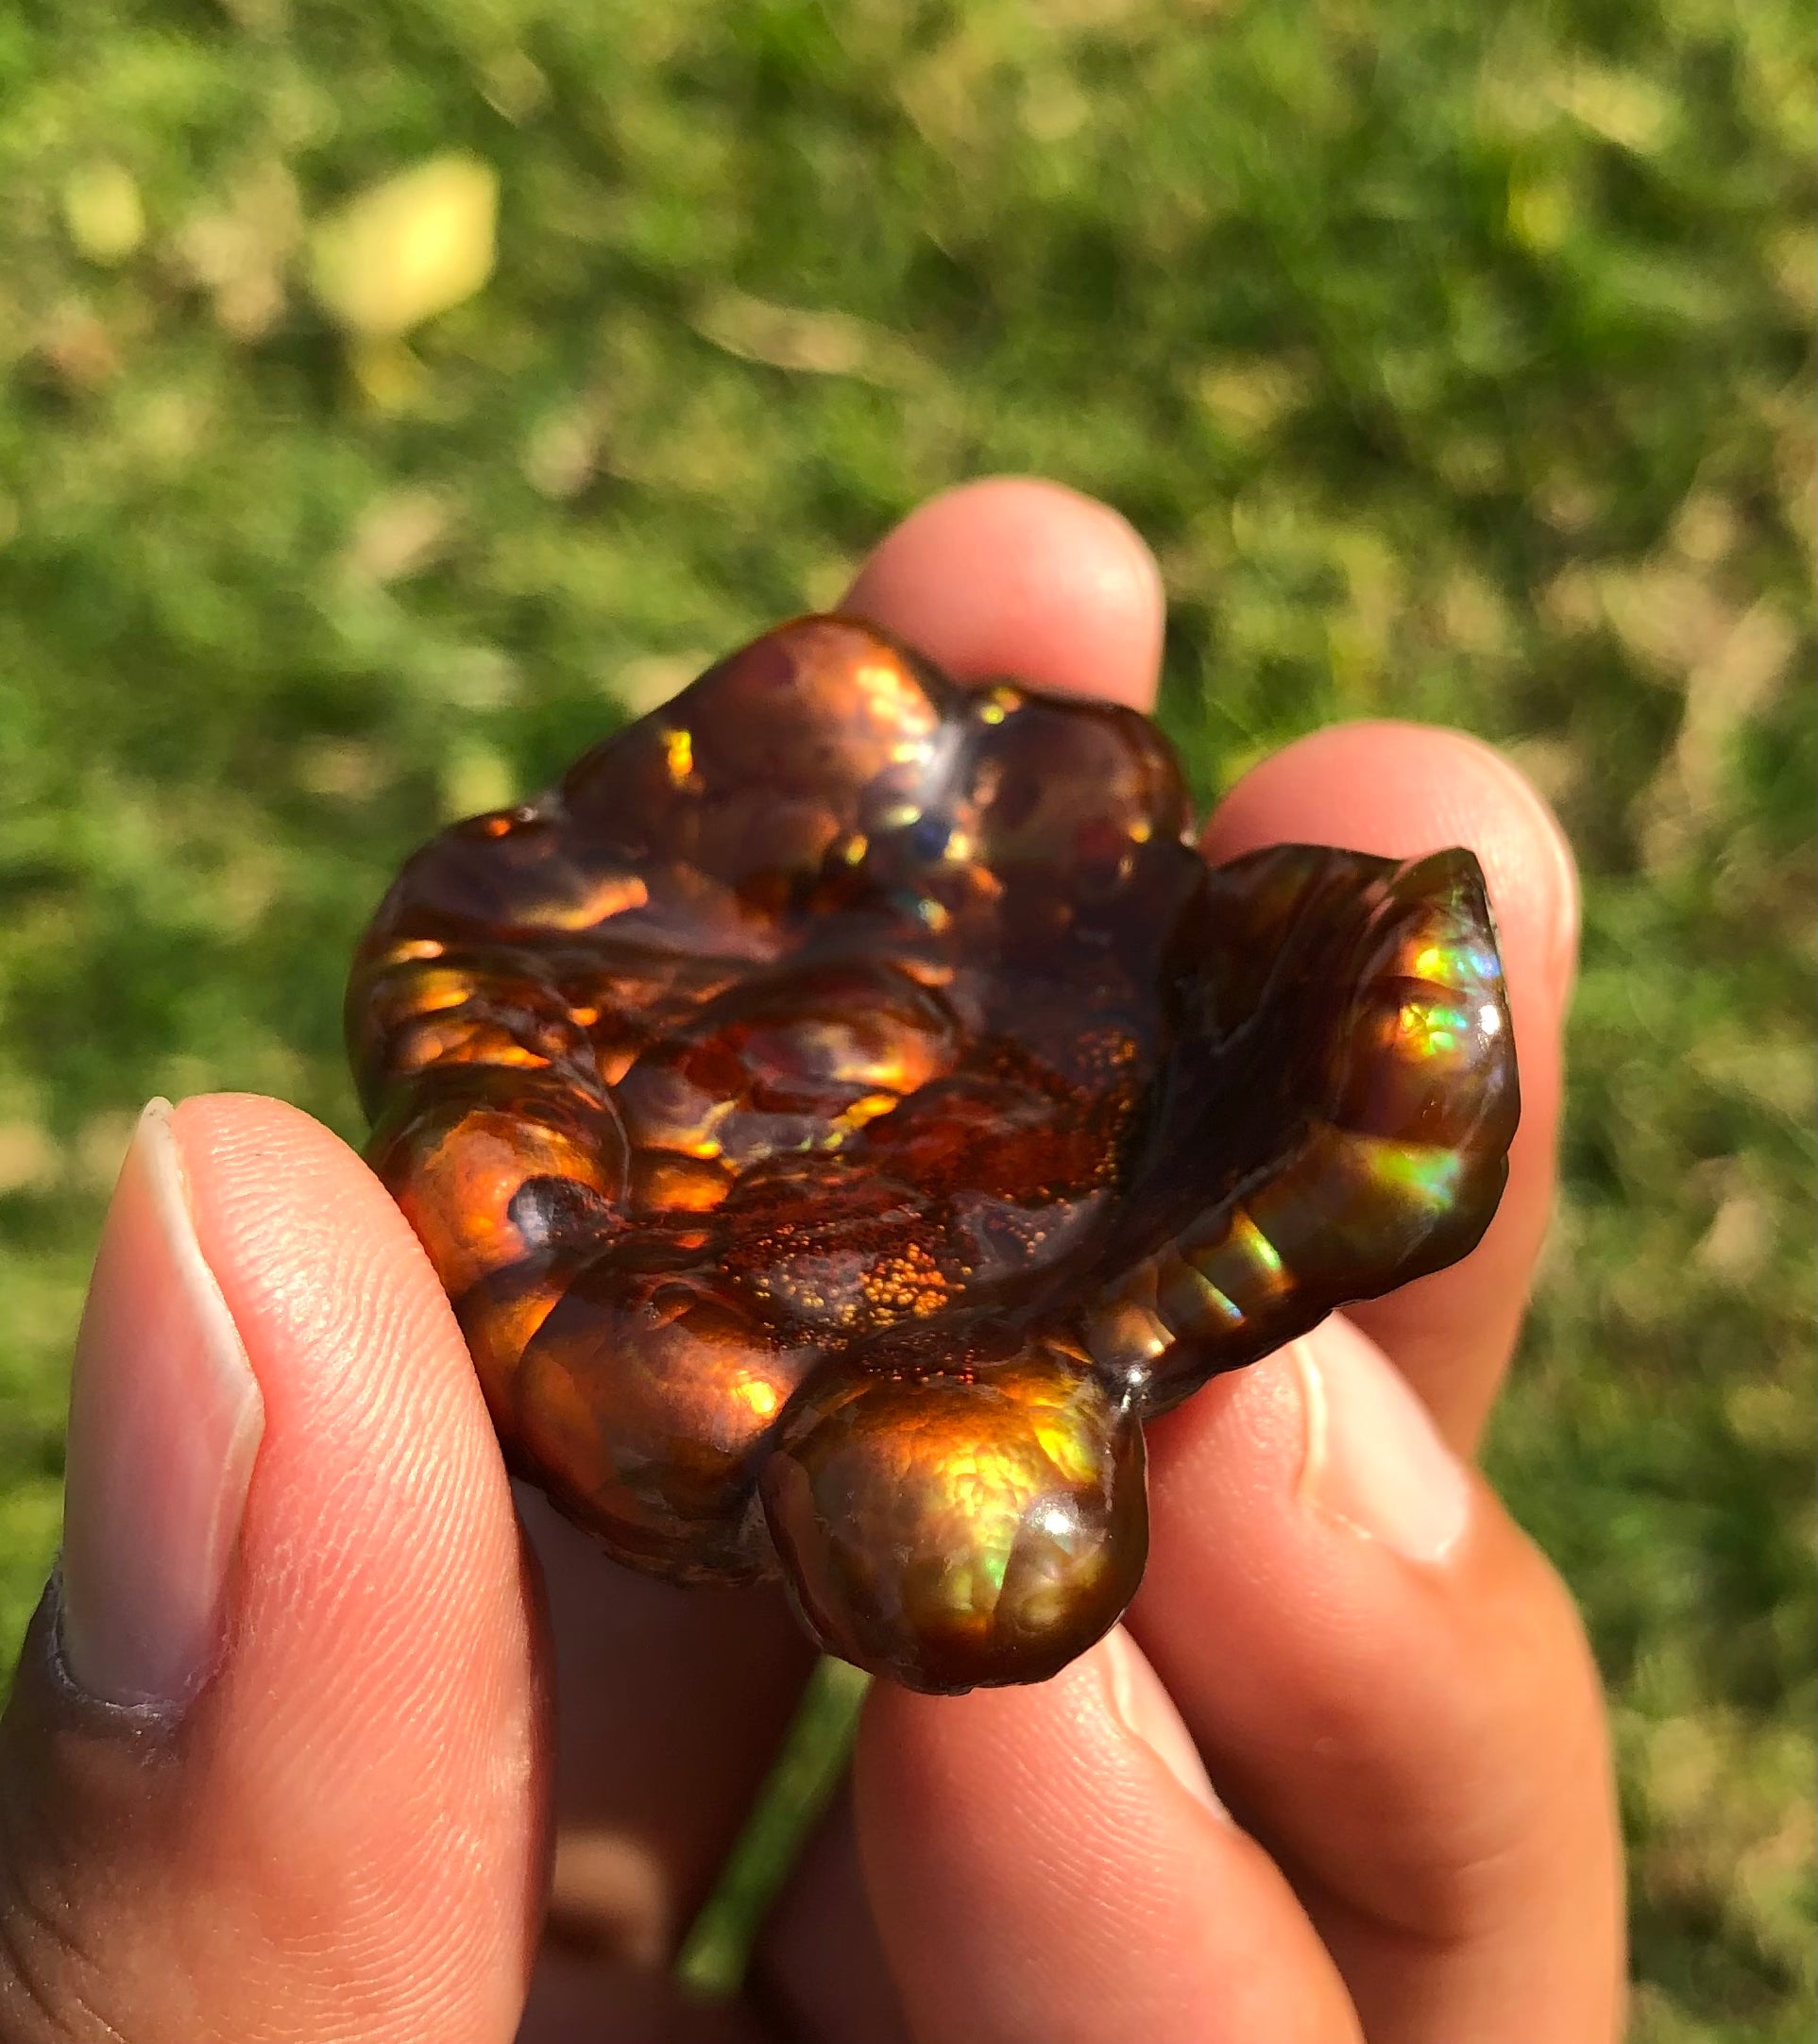 95ct Big Size Rare Fire Agate Carving - Collector Gemstone